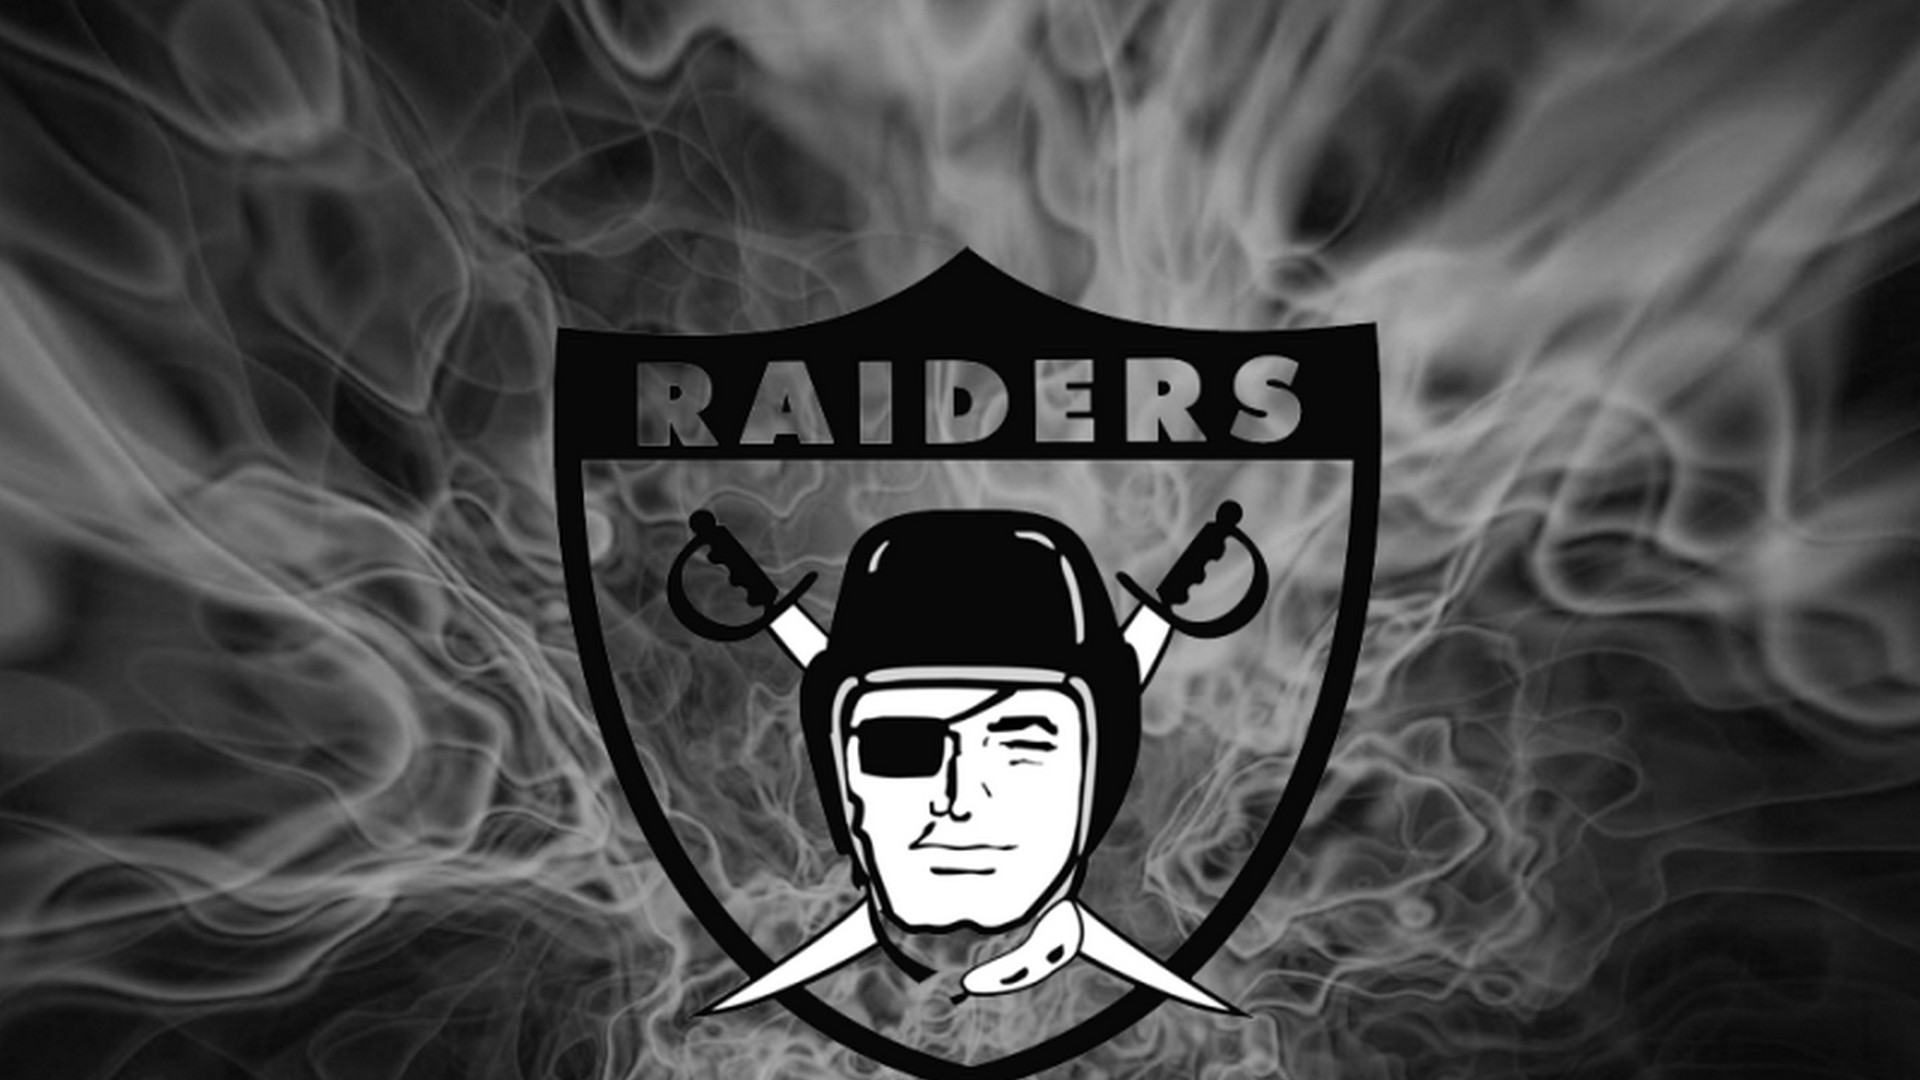 HD Oakland Raiders Wallpapers With high-resolution 1920X1080 pixel. You can use this wallpaper for your Mac or Windows Desktop Background, iPhone, Android or Tablet and another Smartphone device